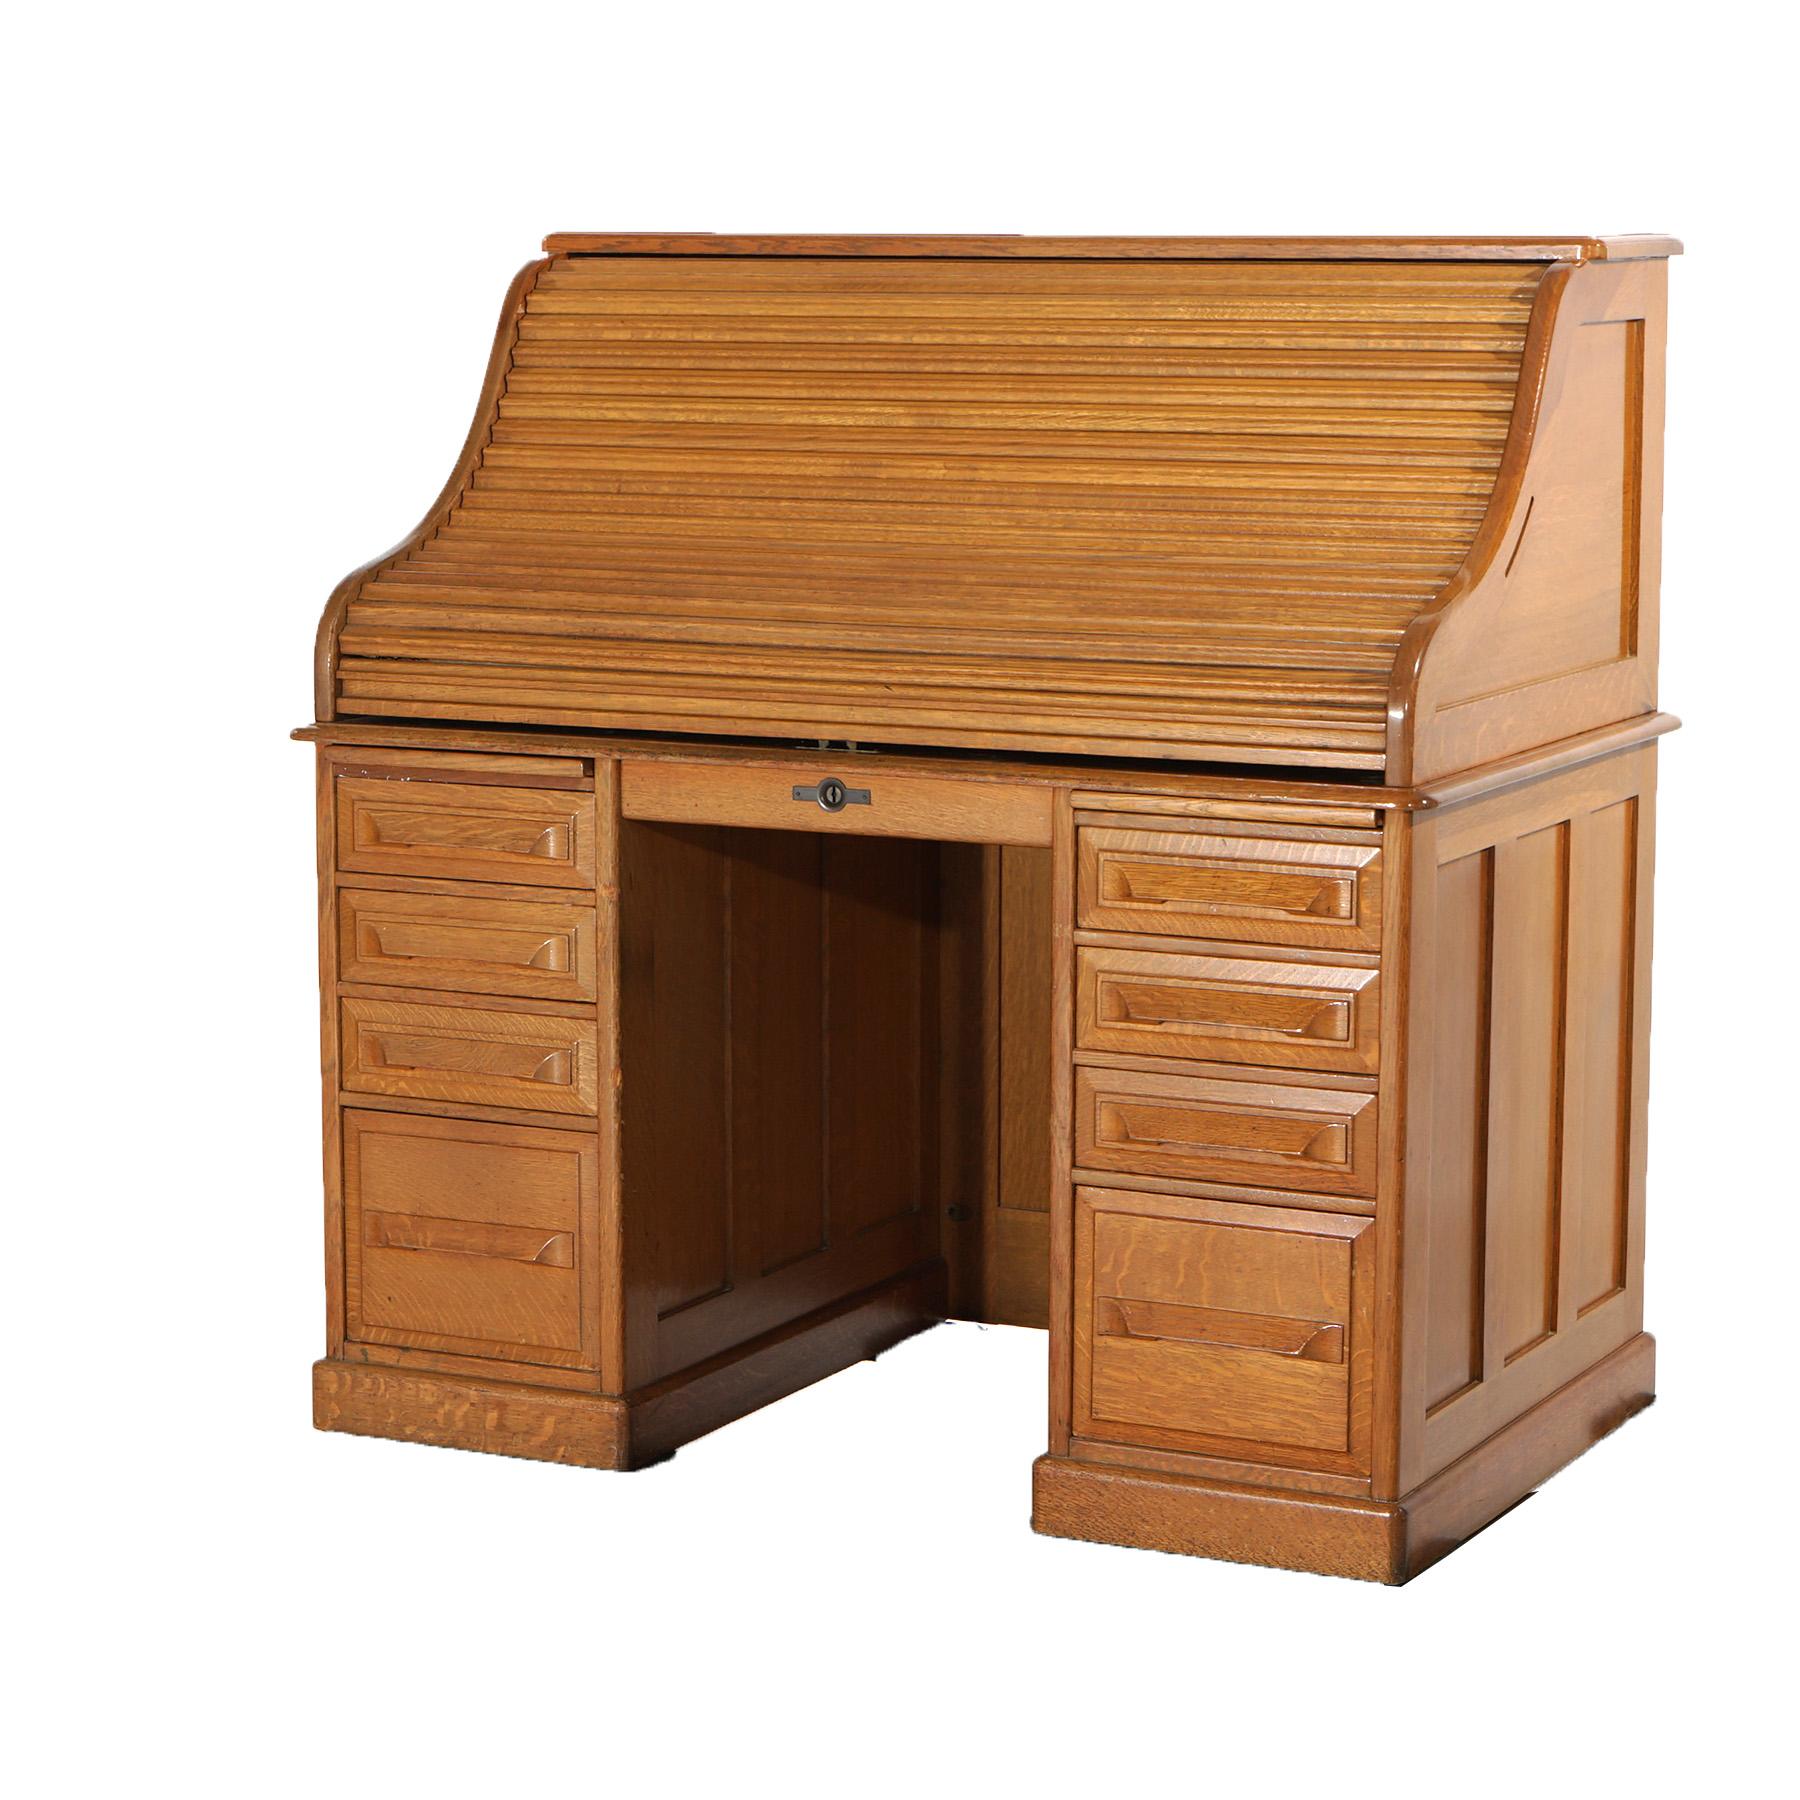 ***Ask About Lower In-House Shipping Rates - Reliable Service & Fully Insured***
An antique desk in the manner of Horner offers paneled oak construction with s-roll top opening to interior with storage compartments over lower case having central